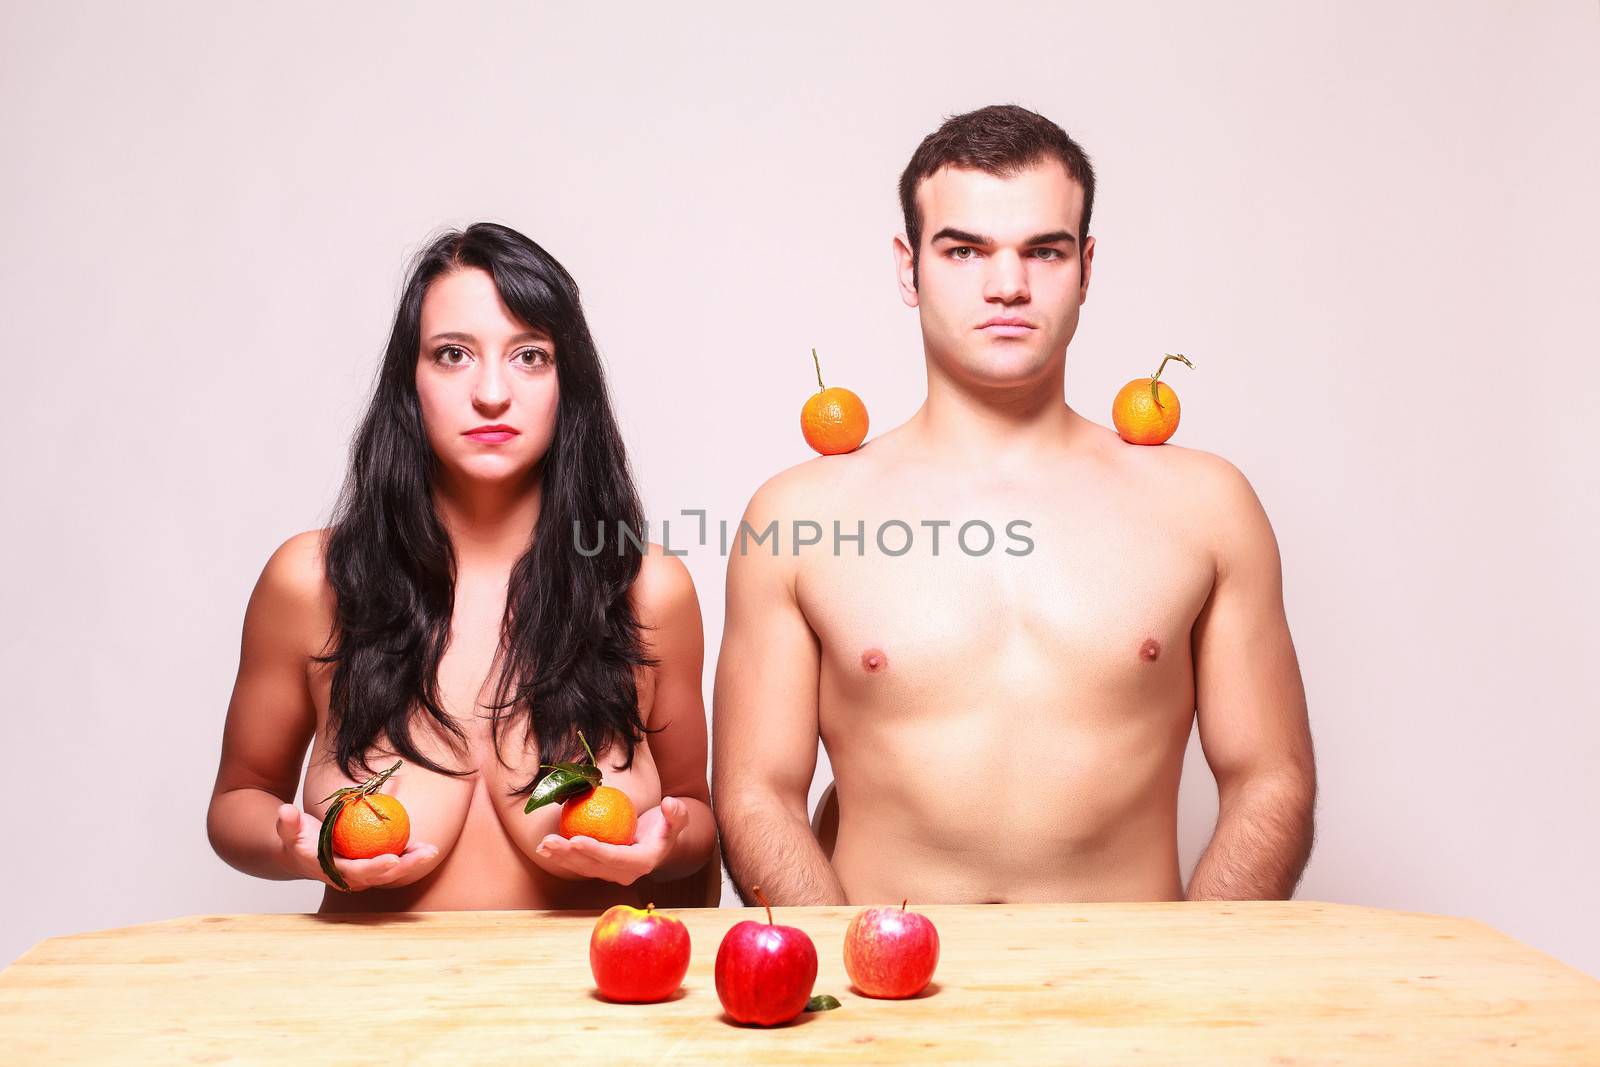 Conceptual image of a young nude man and woman posing with fresh tropical fruit in their hands and balanced on their shoulders looking at the camera with serious expressions as they sit at a table